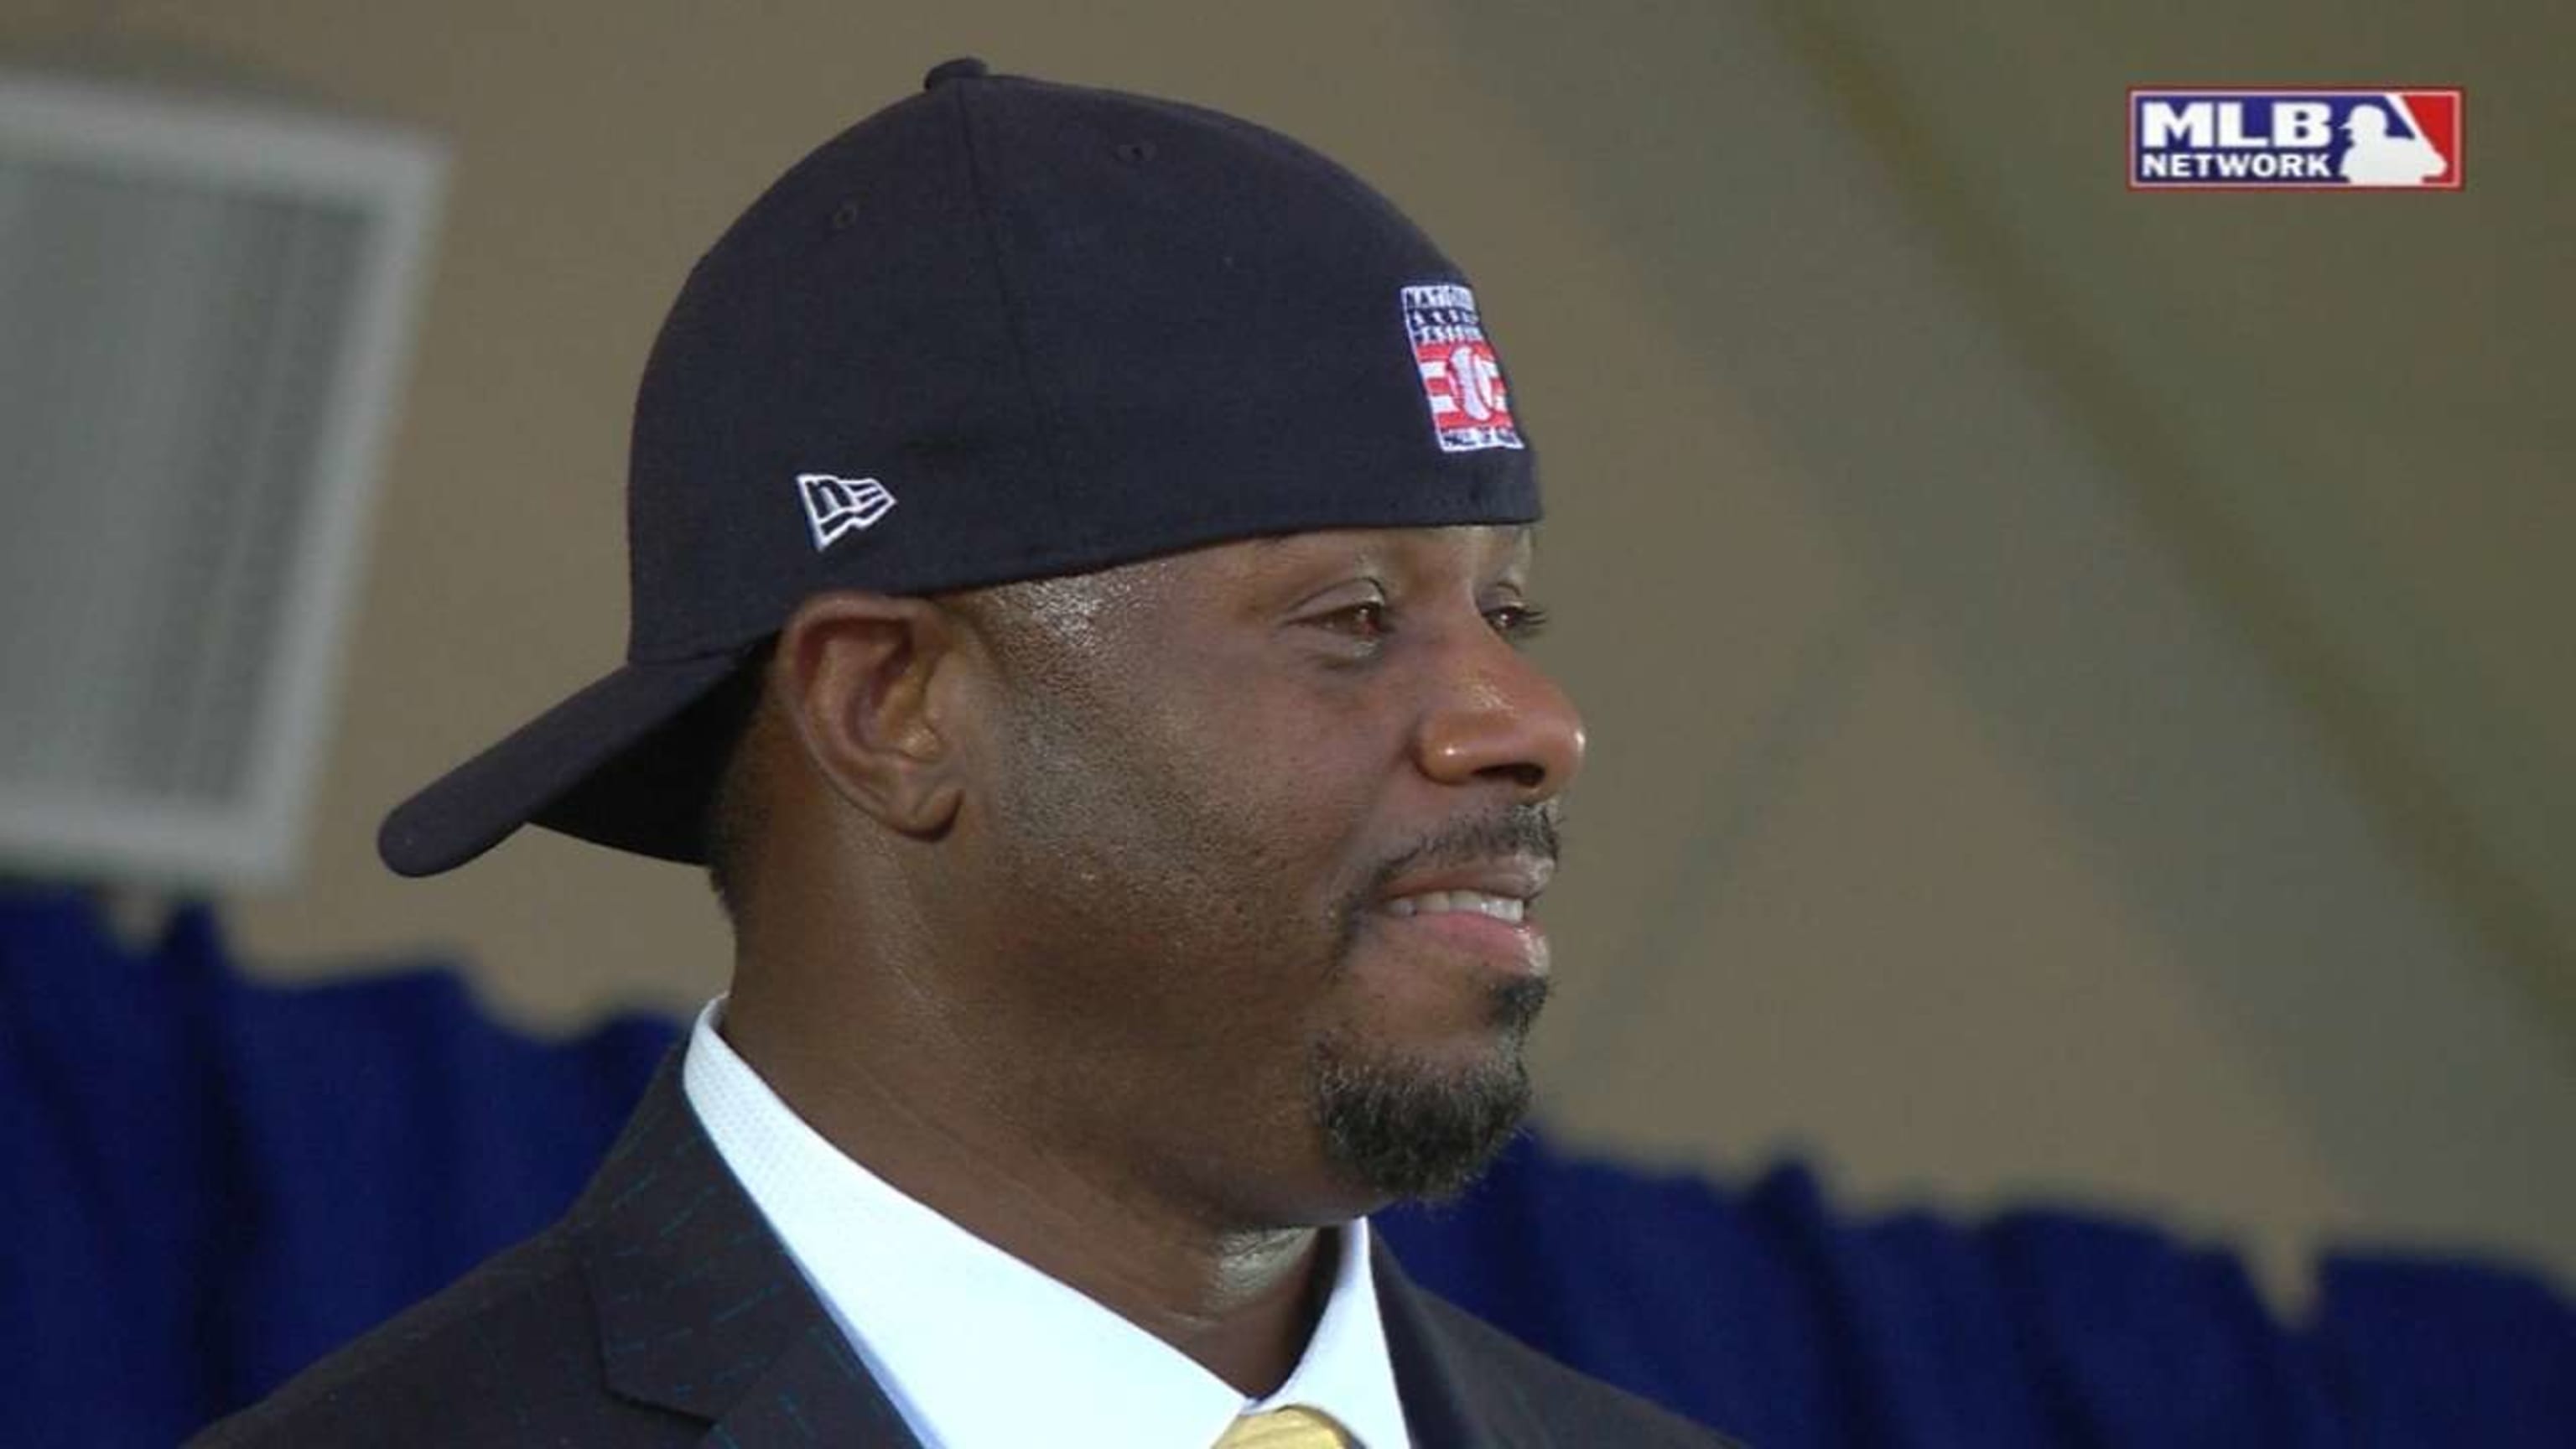 Ken Griffey Jr. ended his HOF induction speech by -- what else? -- putting  his cap on backward